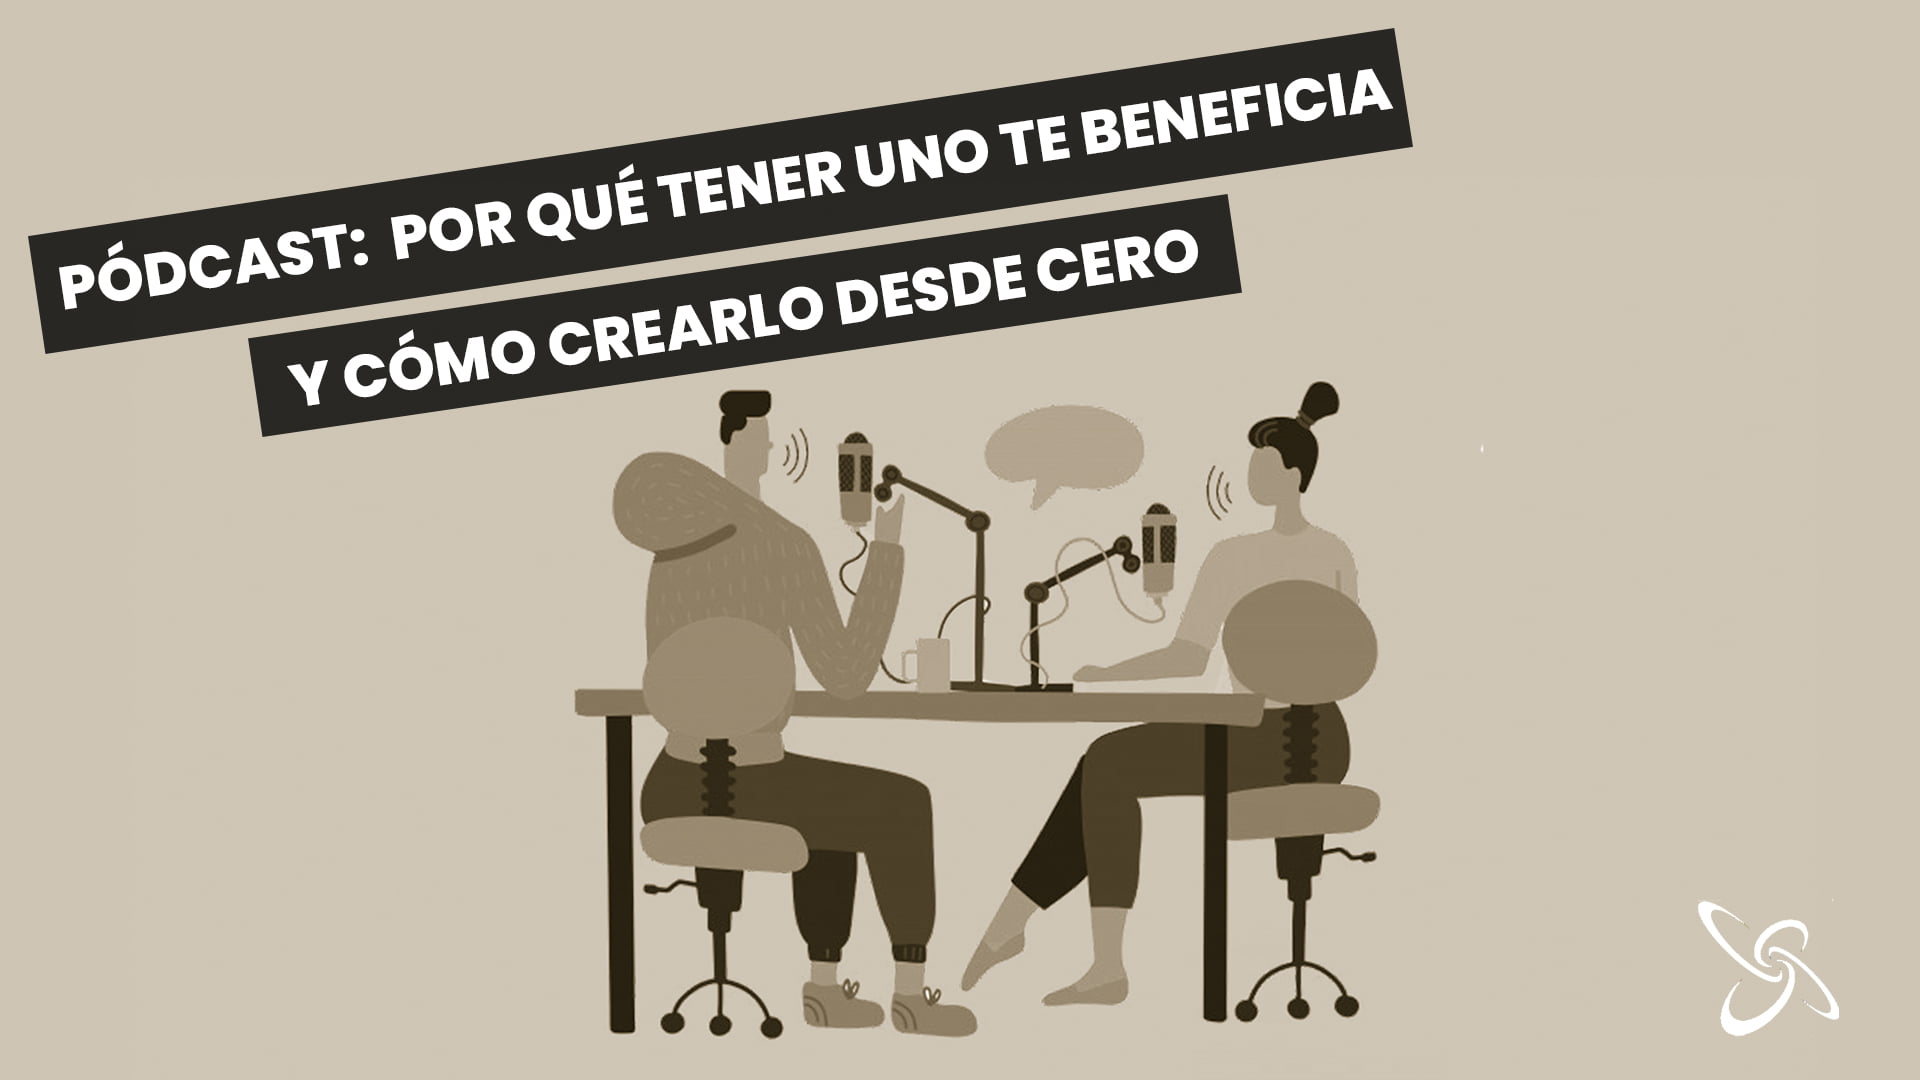 Podcast: why having one benefits you and how to create it from scratch